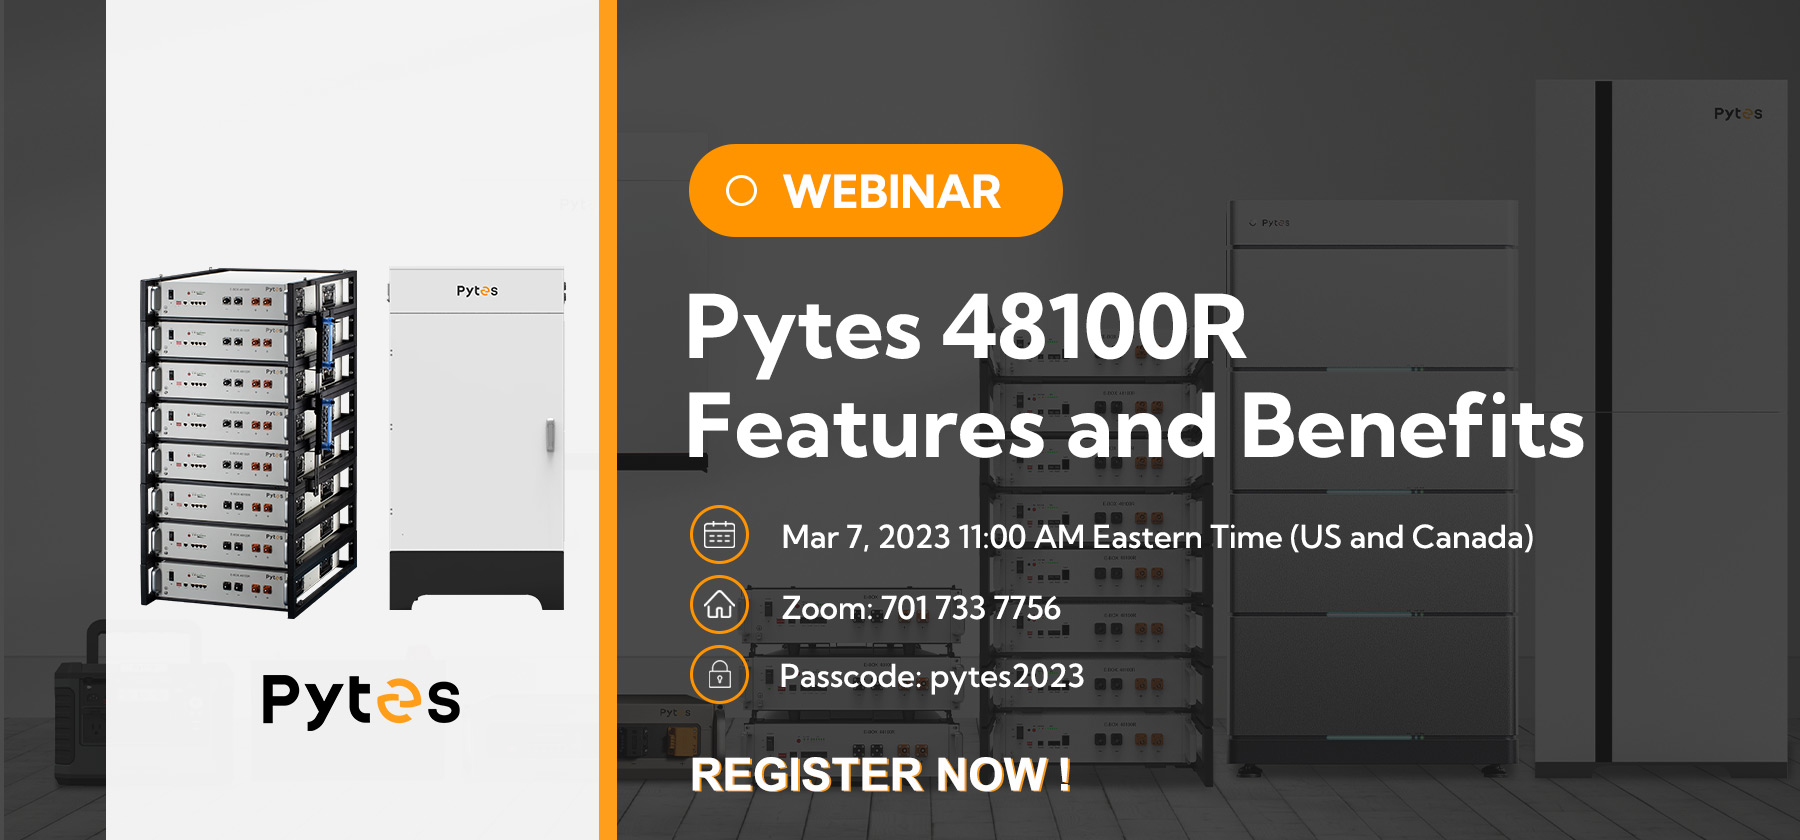 Webinar - Pytes 48100R Features and Benefits